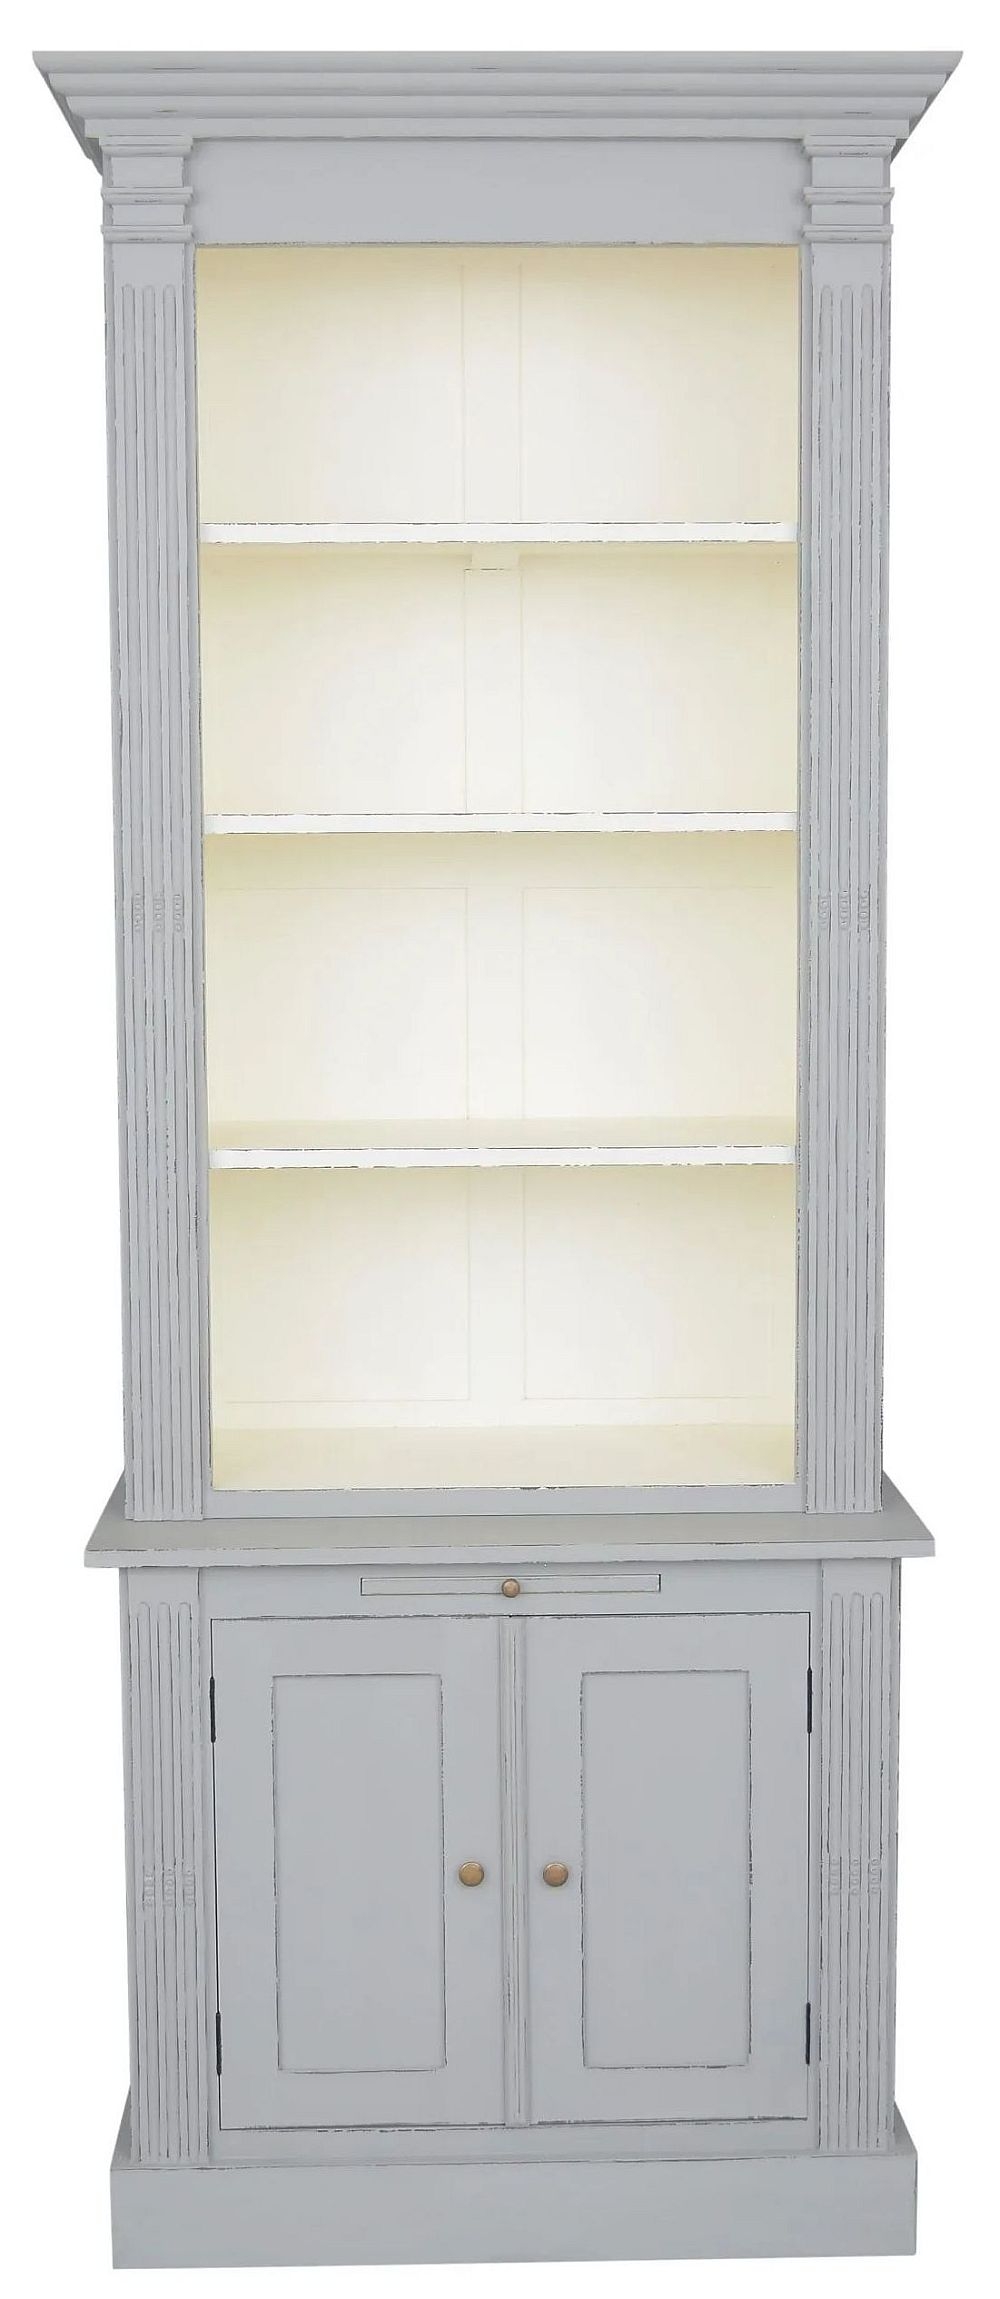 Valerie French Distressed Stone Grey 2 Door Bookcase